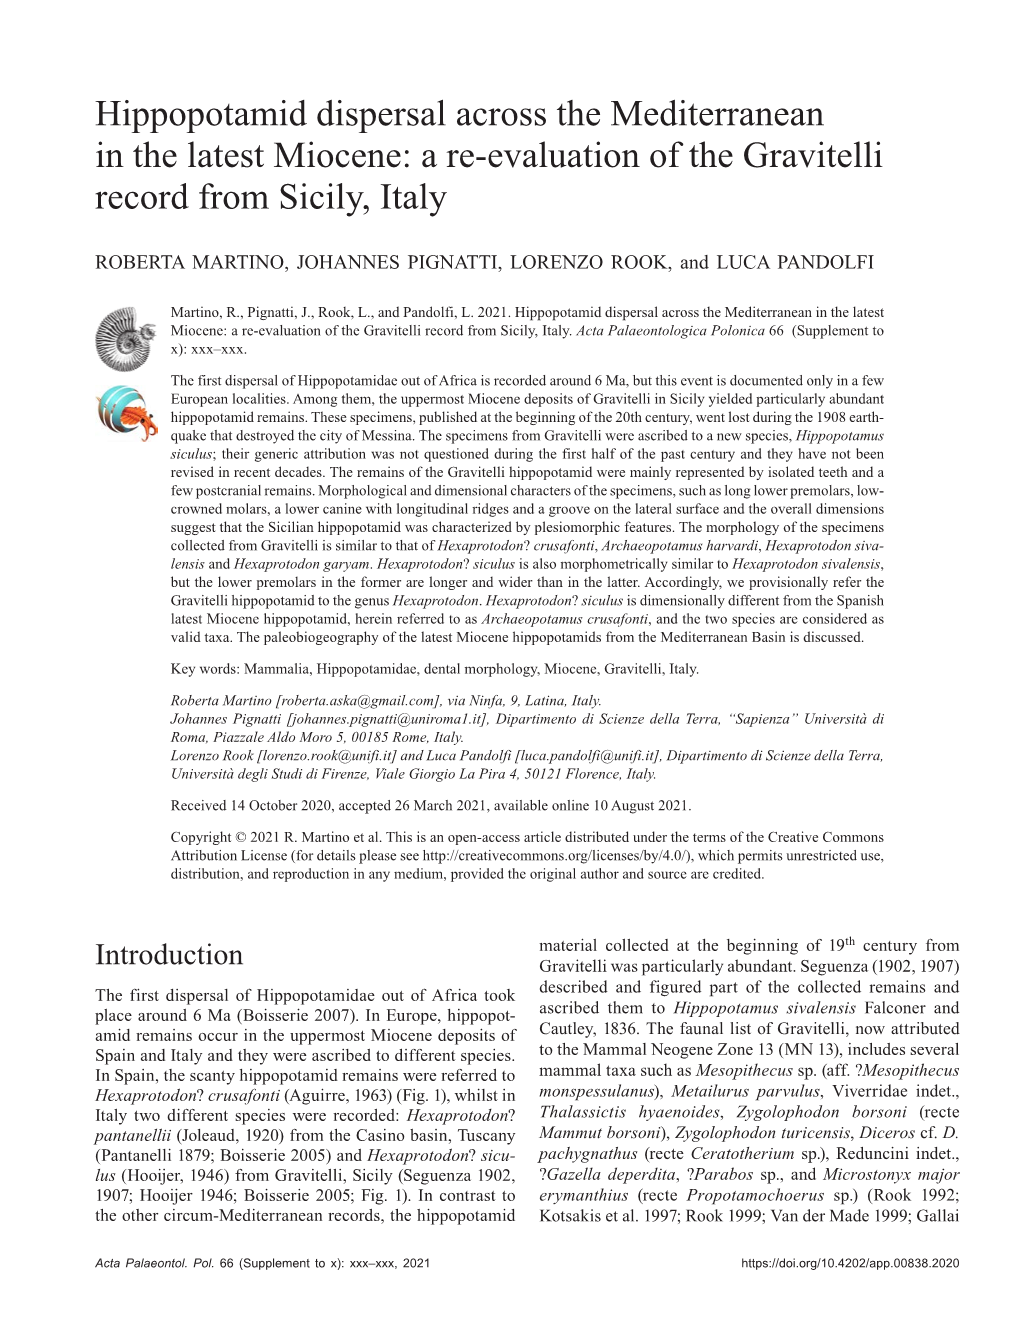 Hippopotamid Dispersal Across the Mediterranean in the Latest Miocene: a Re-Evaluation of the Gravitelli Record from Sicily, Italy